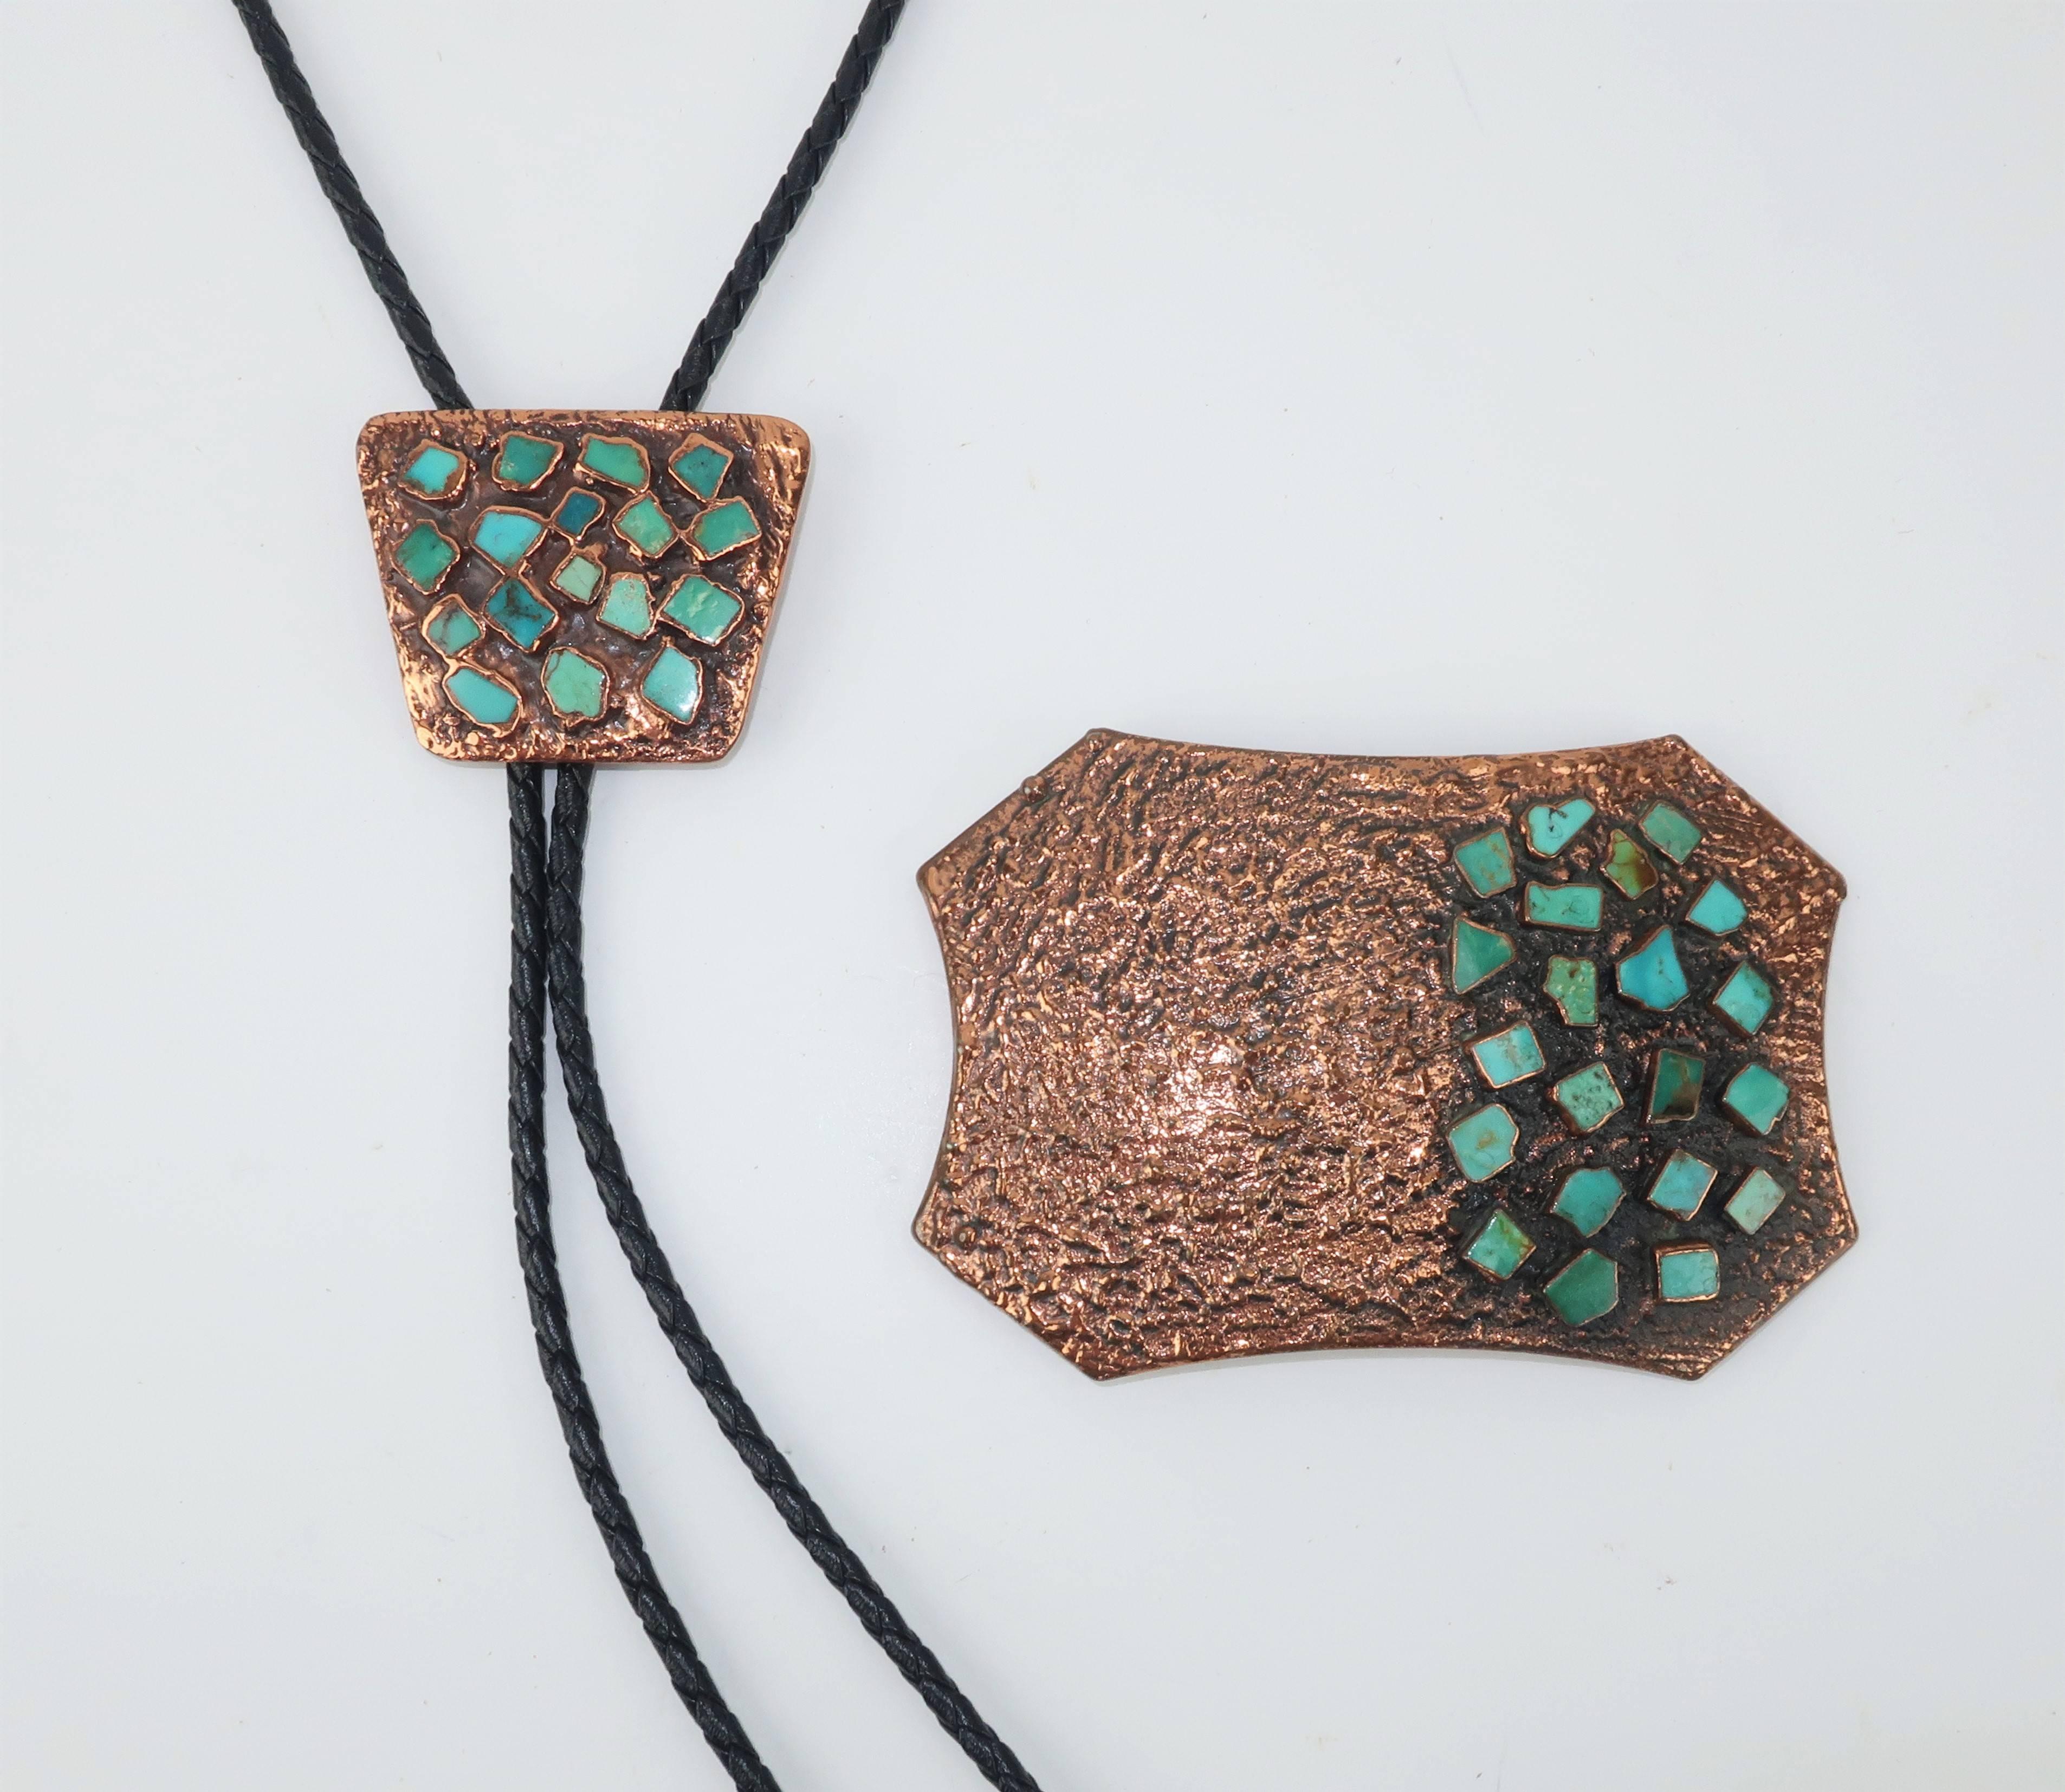 Wear your western wear in style with this fabulous solid copper set from Bell Trading Company, specialists in Native American Indian jewelry from 1935 until 1972.  The brutalist design offers an interesting combination of texture and reflection